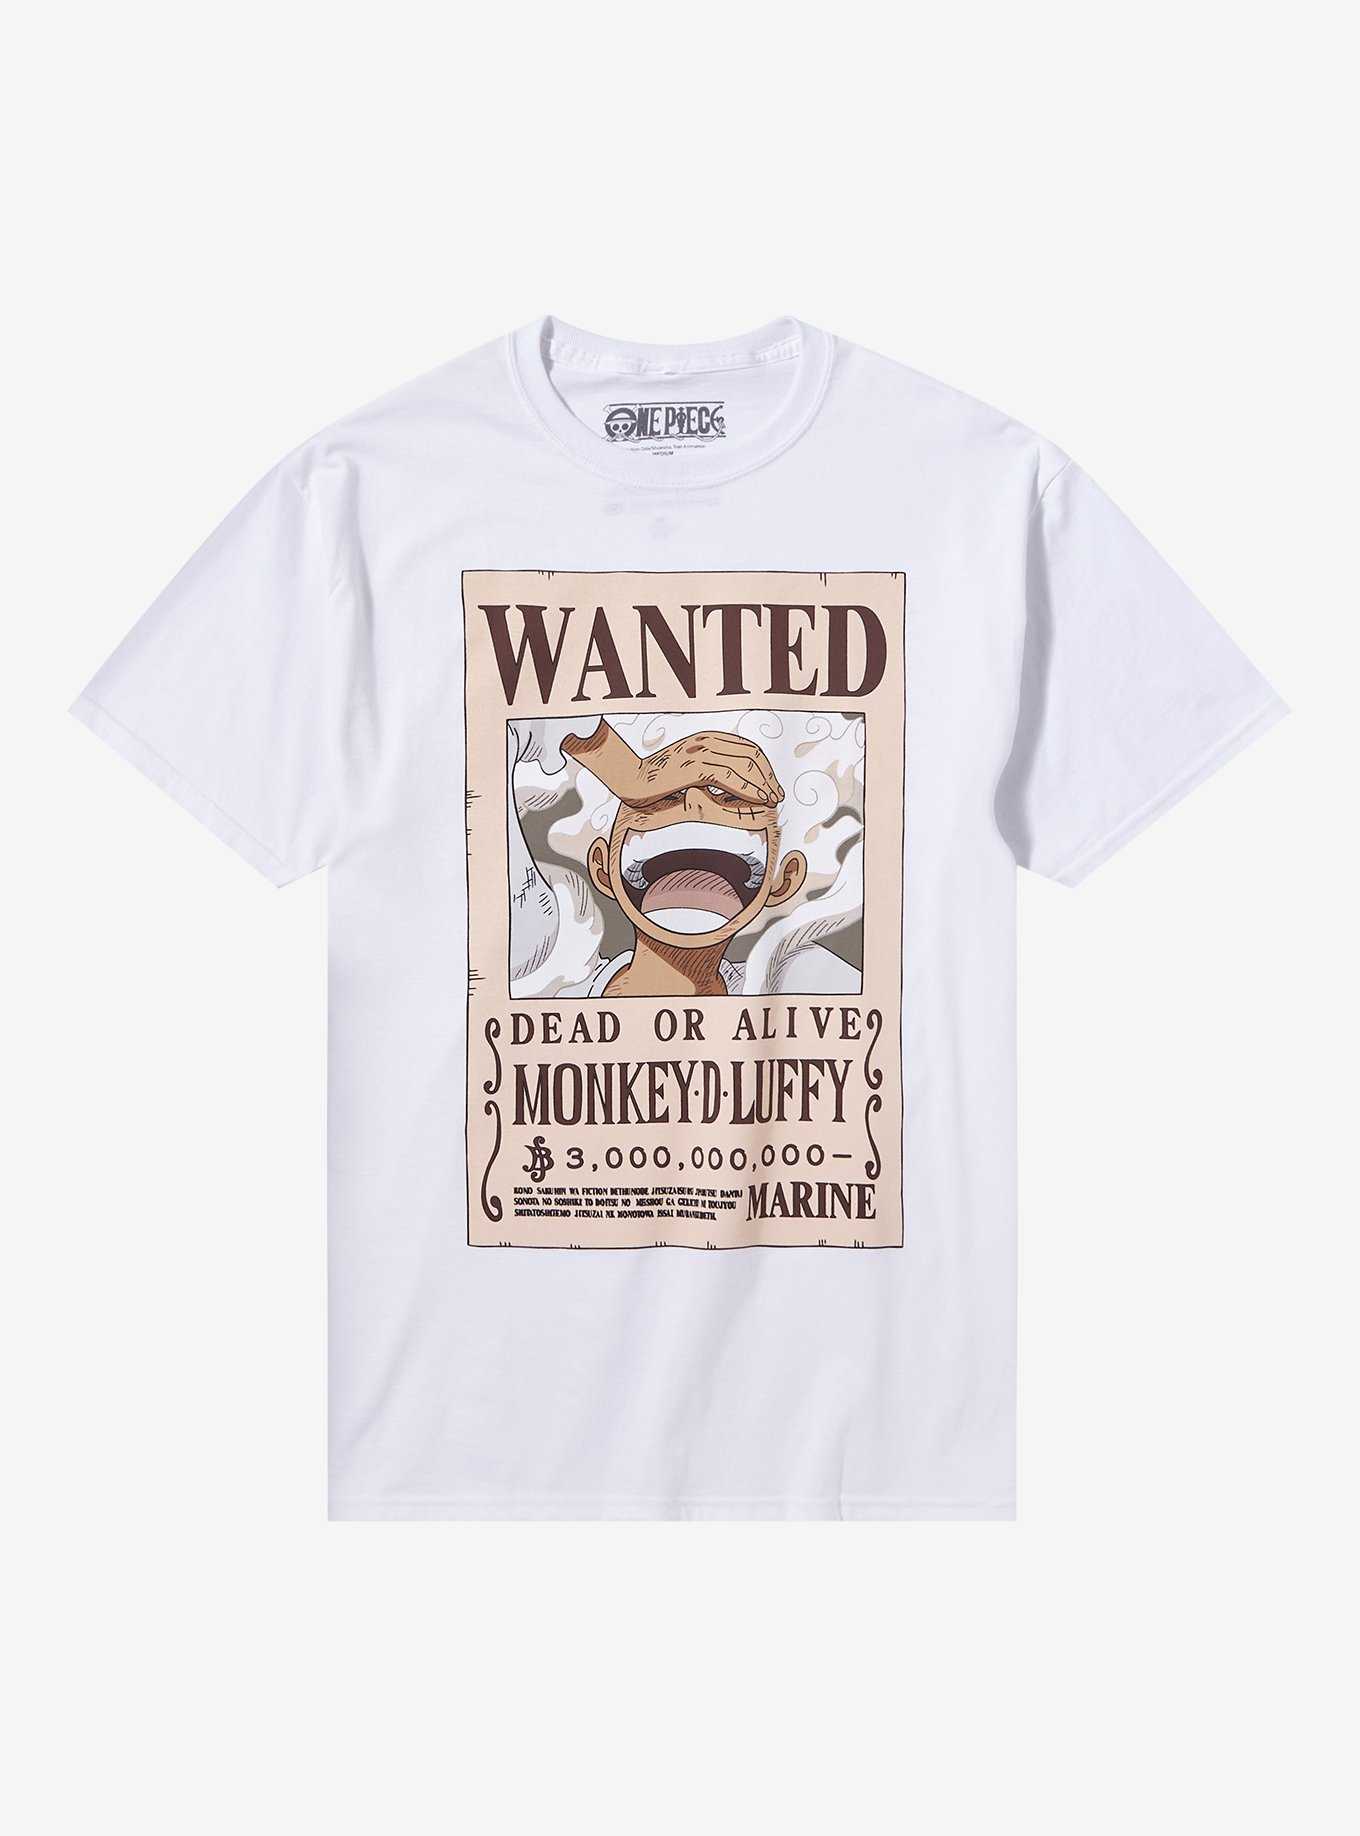 One Piece Luffy Gear 5 Wanted Poster T-Shirt, , hi-res